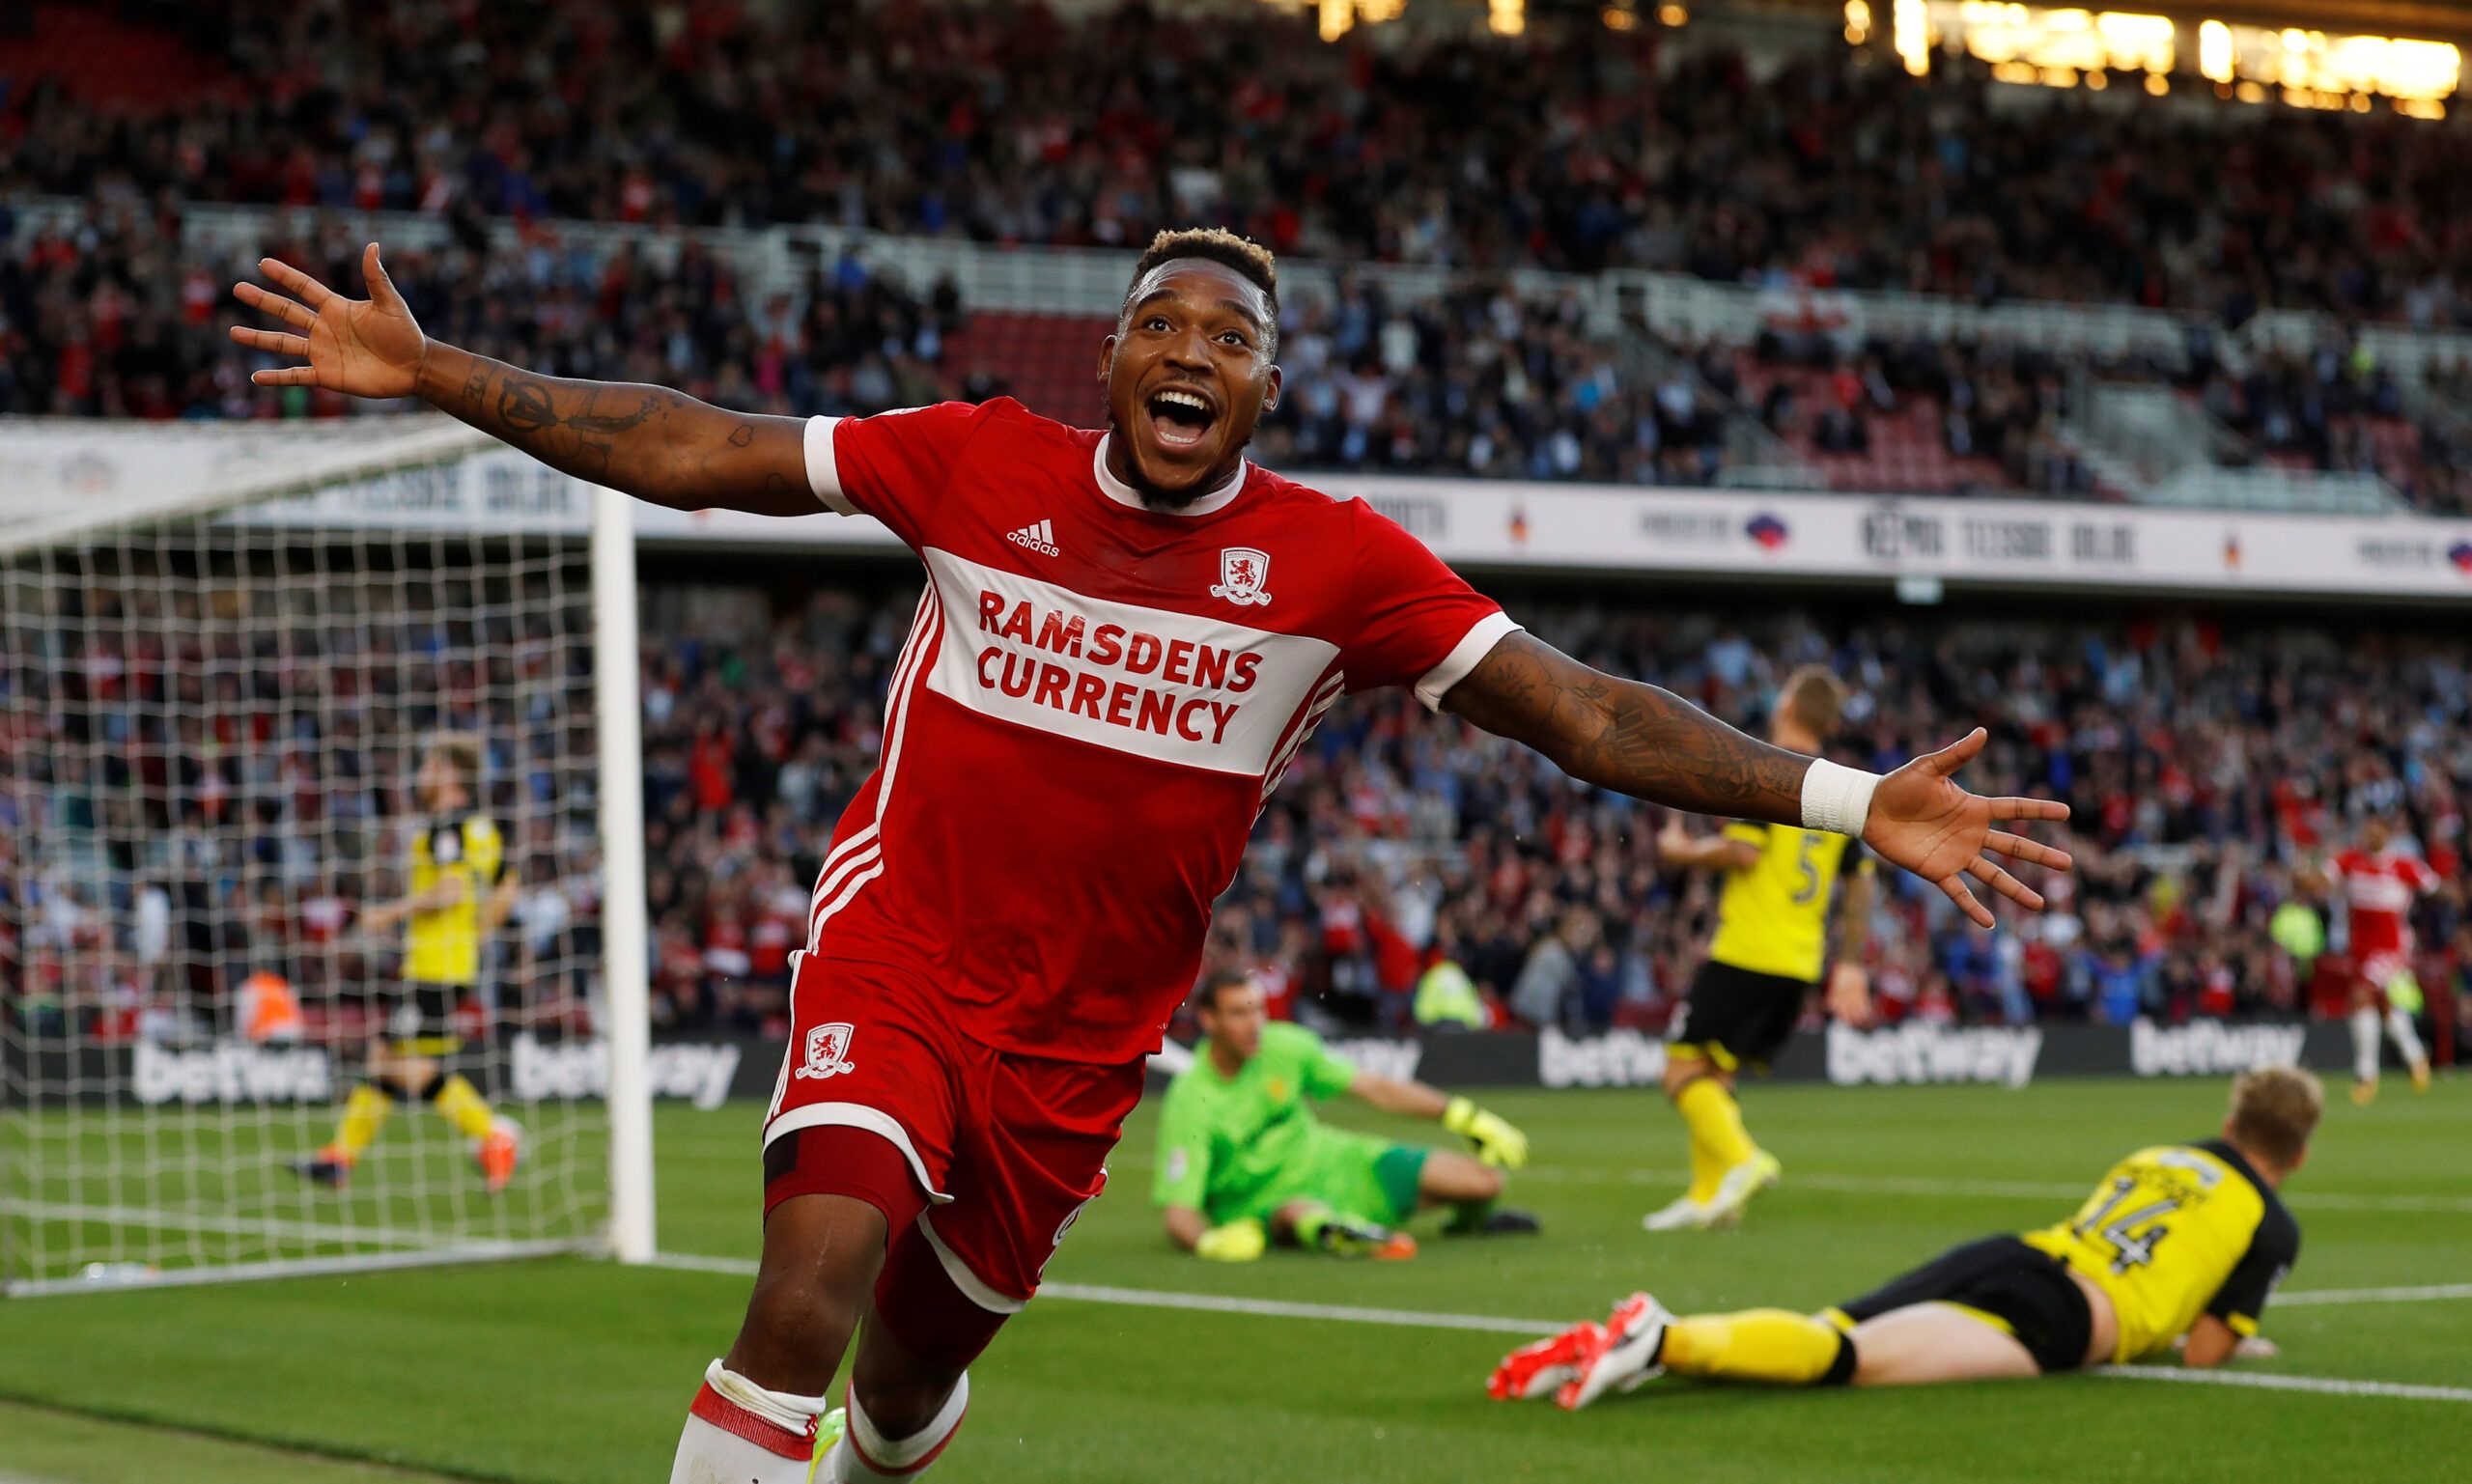 Soccer Football - Championship - Middlesbrough vs Burton Albion - Middlesbrough, Britain - August 15, 2017   Middlesbrough's Britt Assombalonga celebrates scoring their first goal   Action Images/Lee Smith